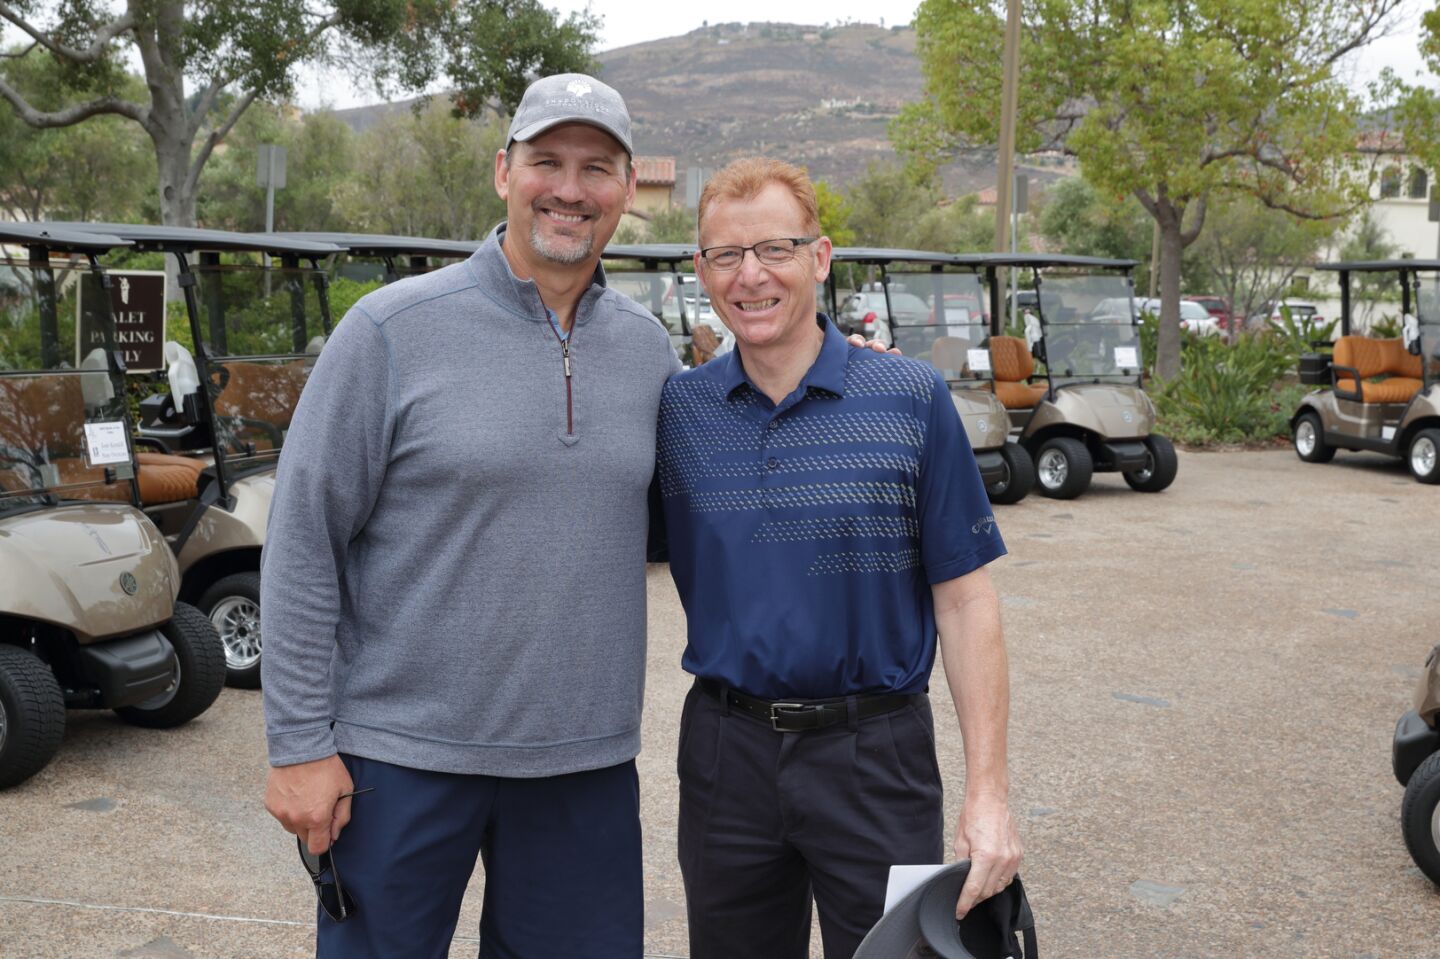 Donnie Dee (Pres & CEO San Diego Rescue Mission), Ted Axe (GM Lomas Santa Fe Country Club)